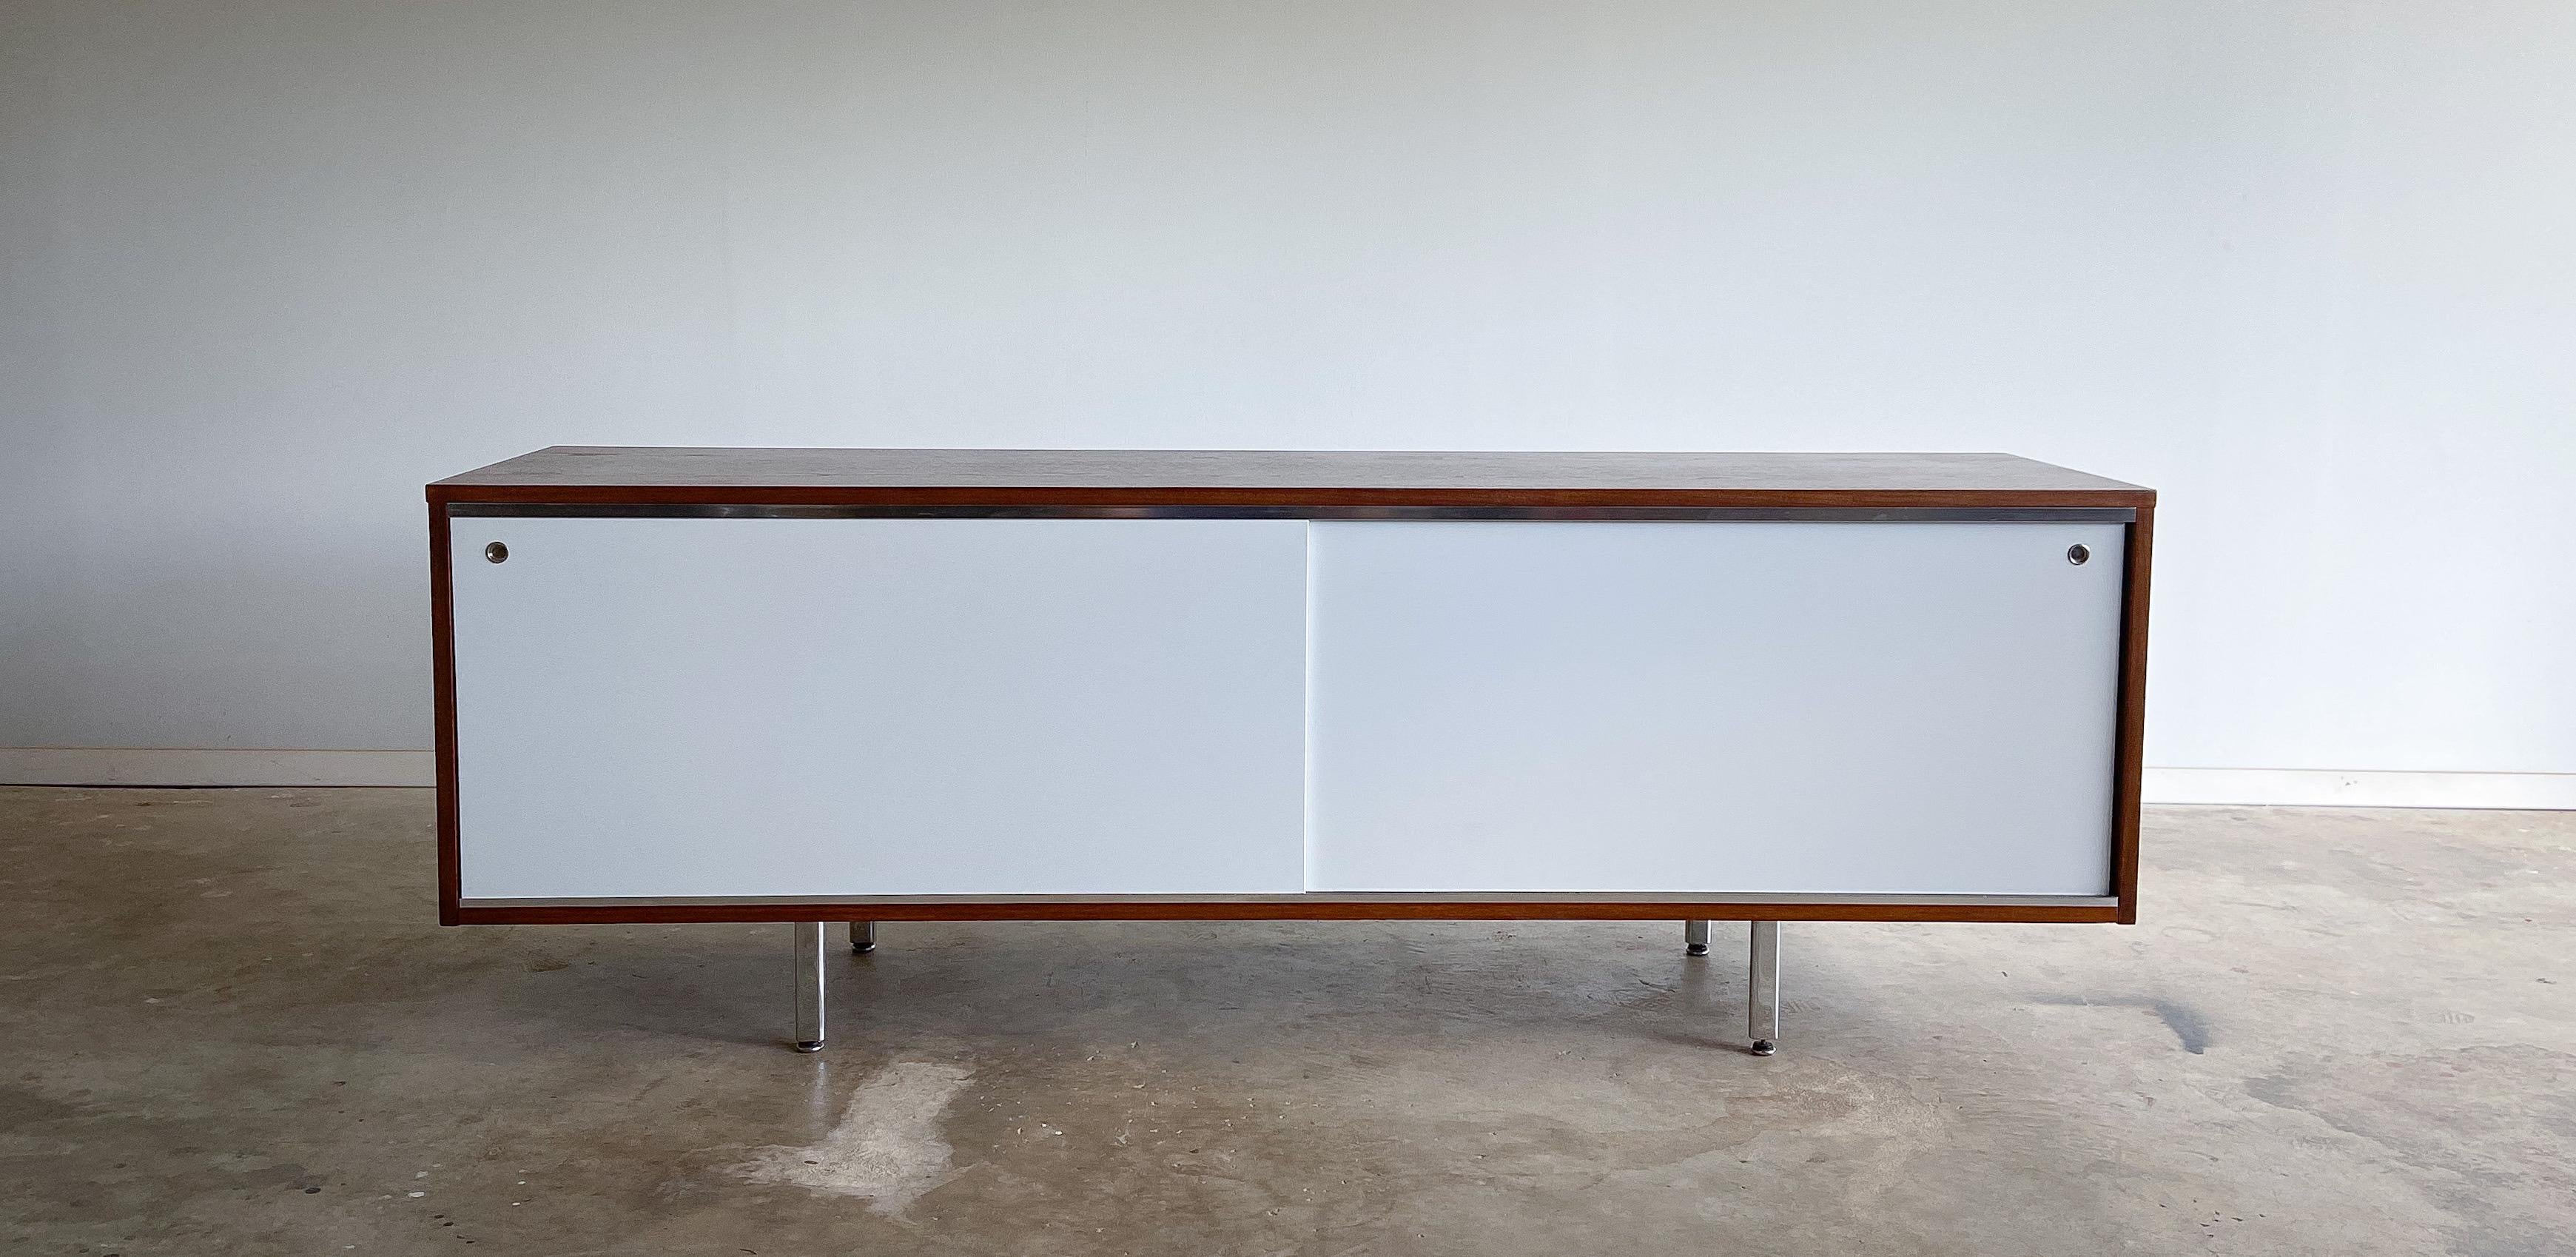 A wonderful credenza designed by George Nelson for Herman Miller. Part of the Executive Office Group (EOG) line designed for executive offices of the period. 

Featuring lovely walnut top and sides, beautifully accented by white lacquered sliding